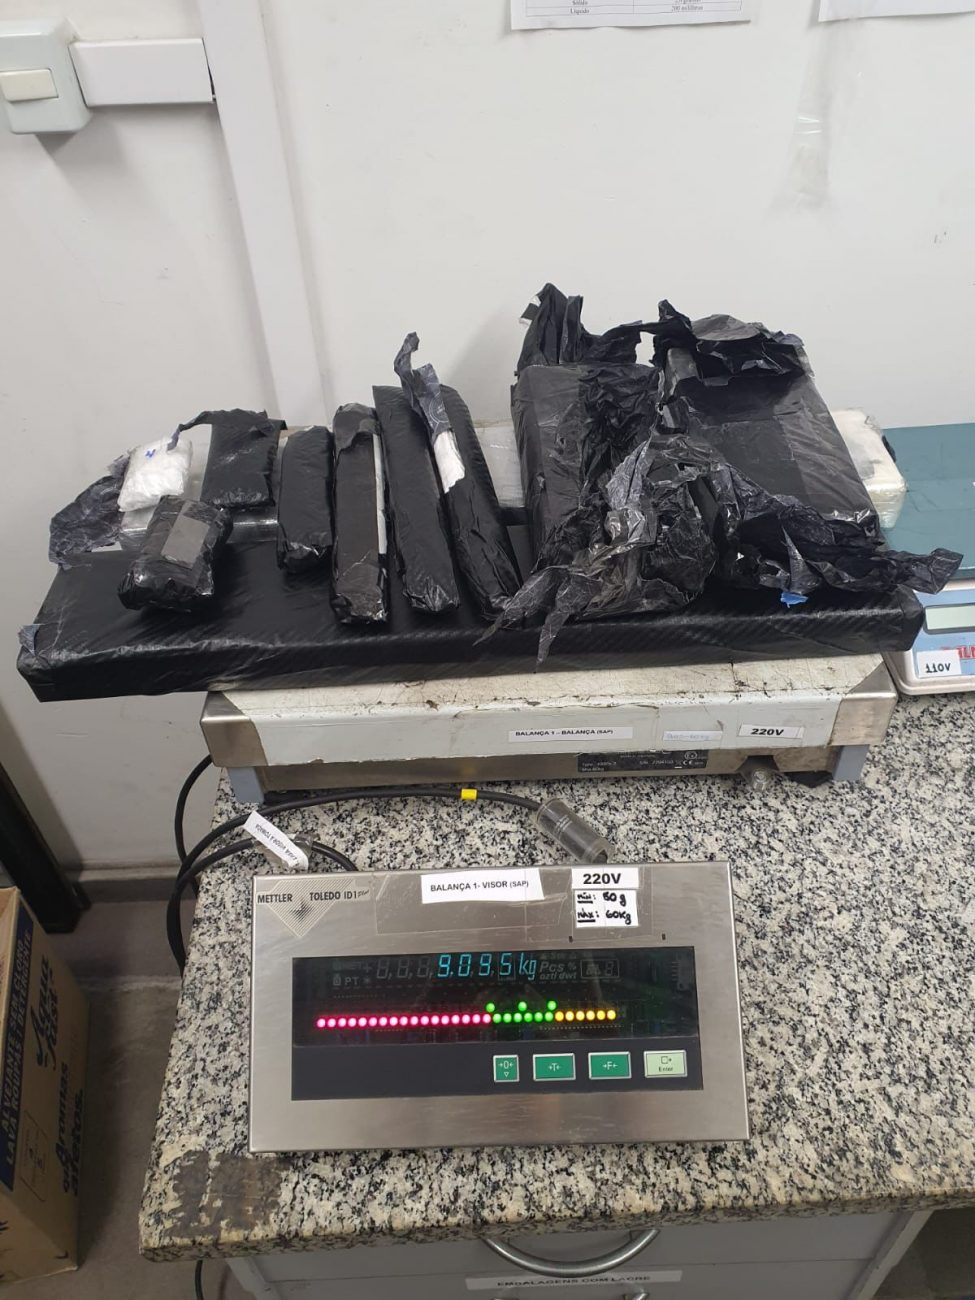 9 kg of cocaine seized - PFRS/Reproduction/ND